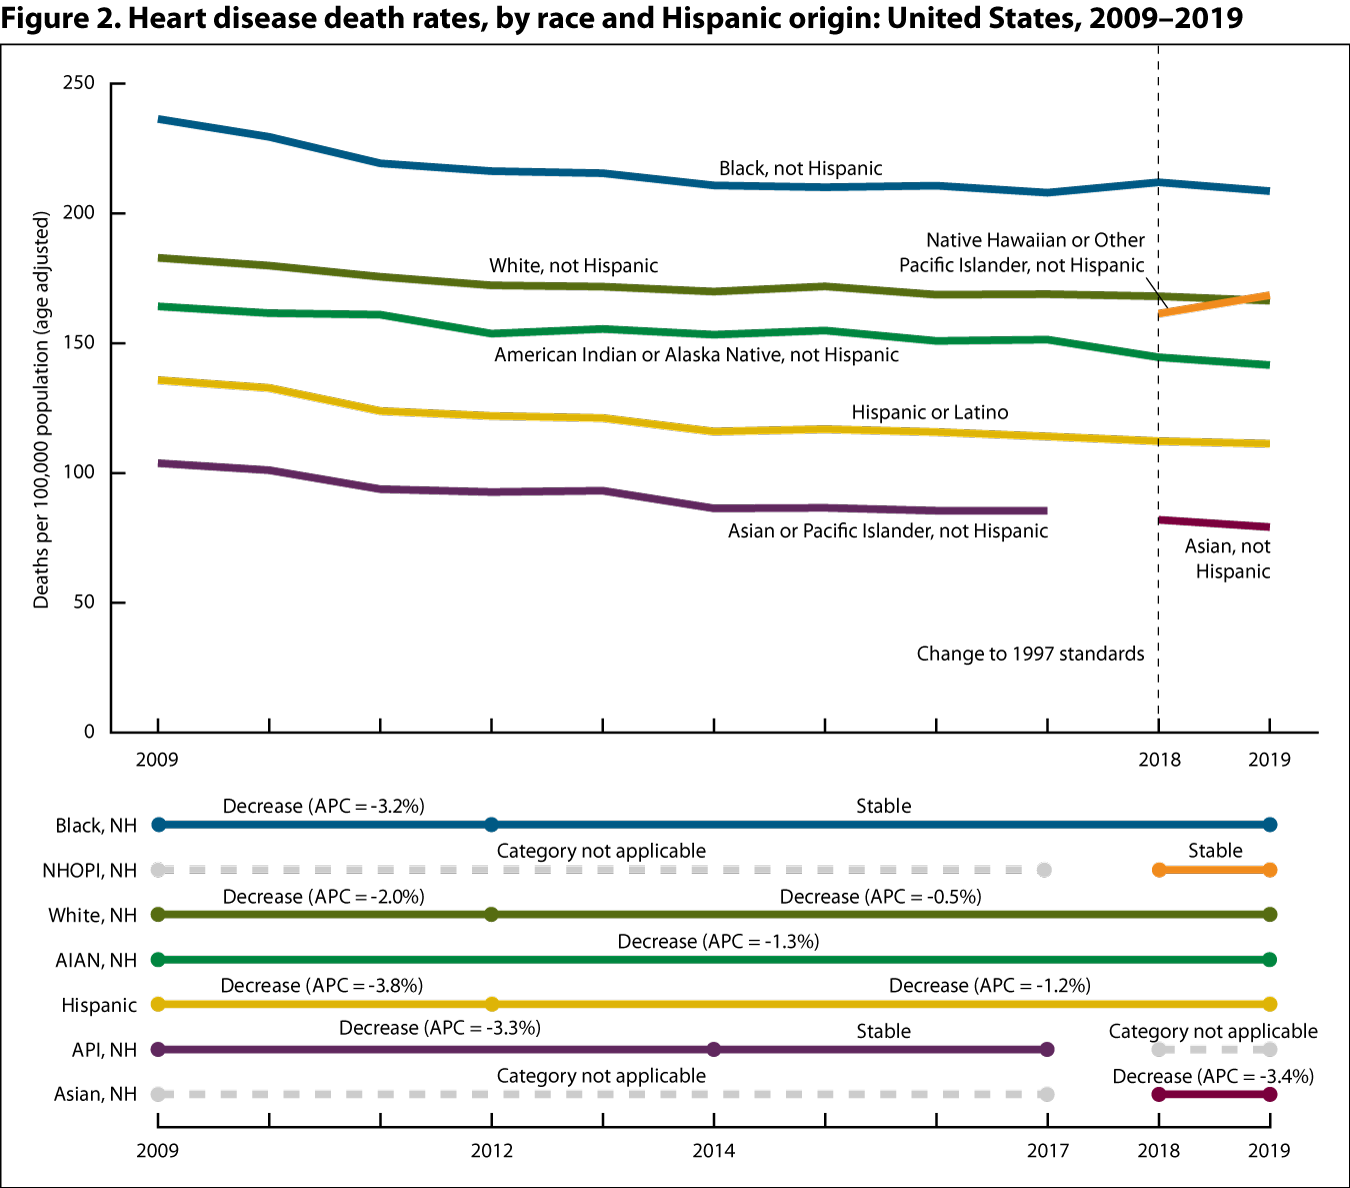 Figure 2 is a line graph showing heart disease death rates (deaths per 100,000 population) by race and Hispanic origin for 2009 through 2019.